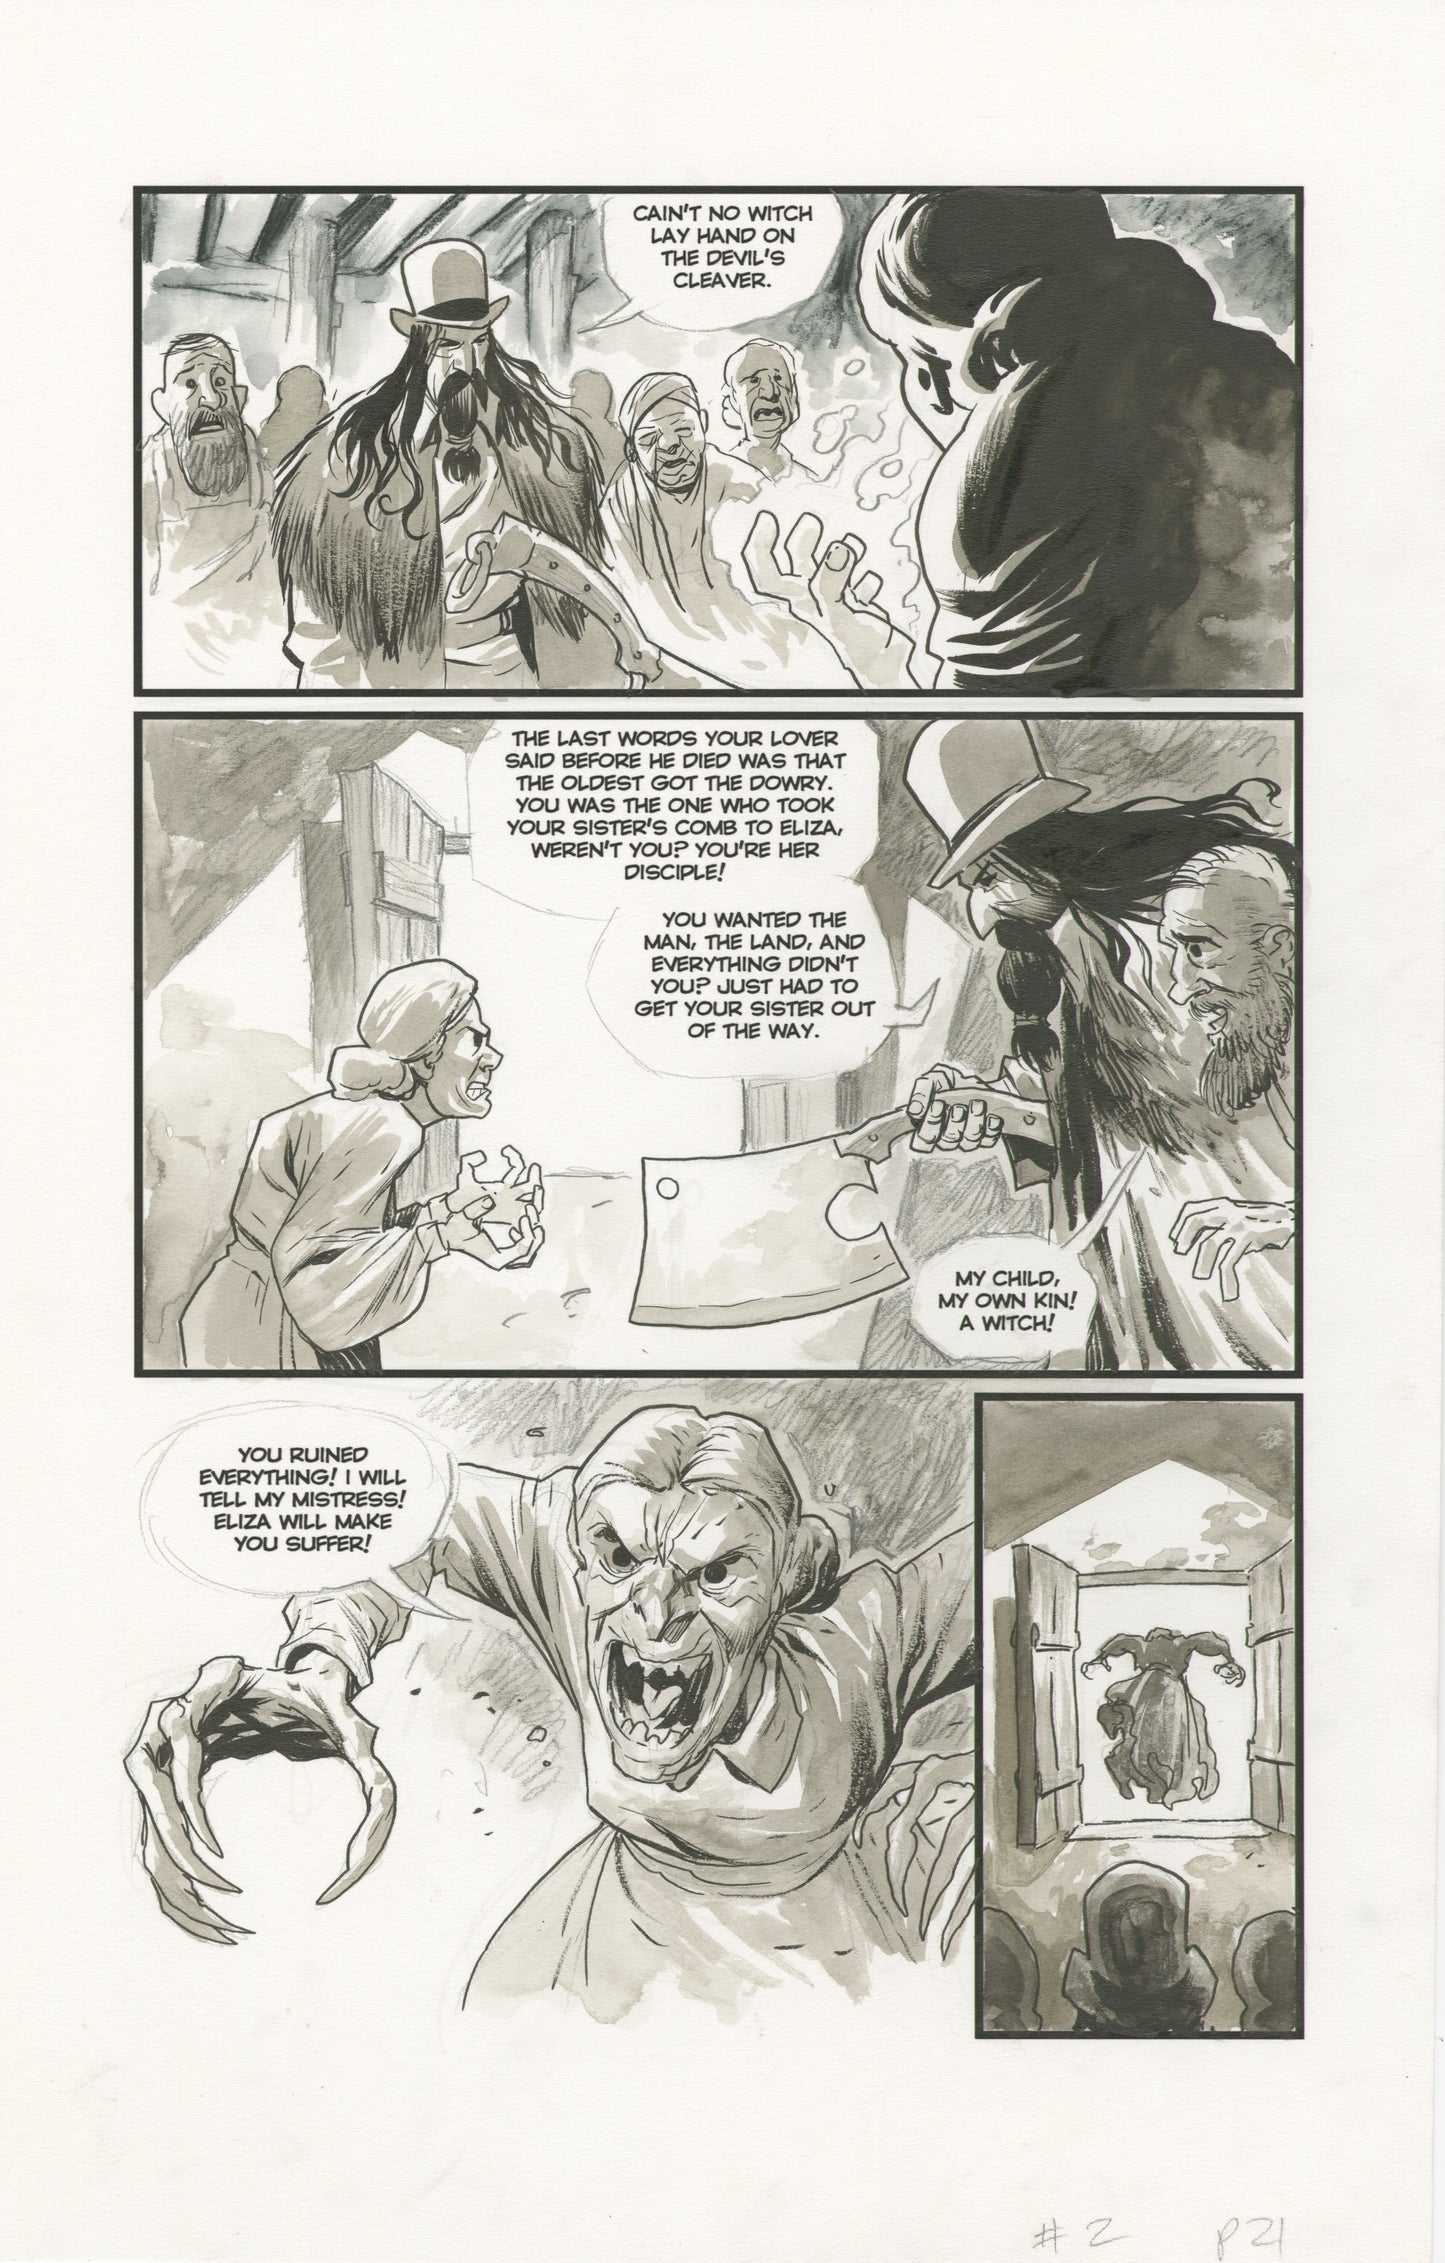 Hillbilly #02, page #21